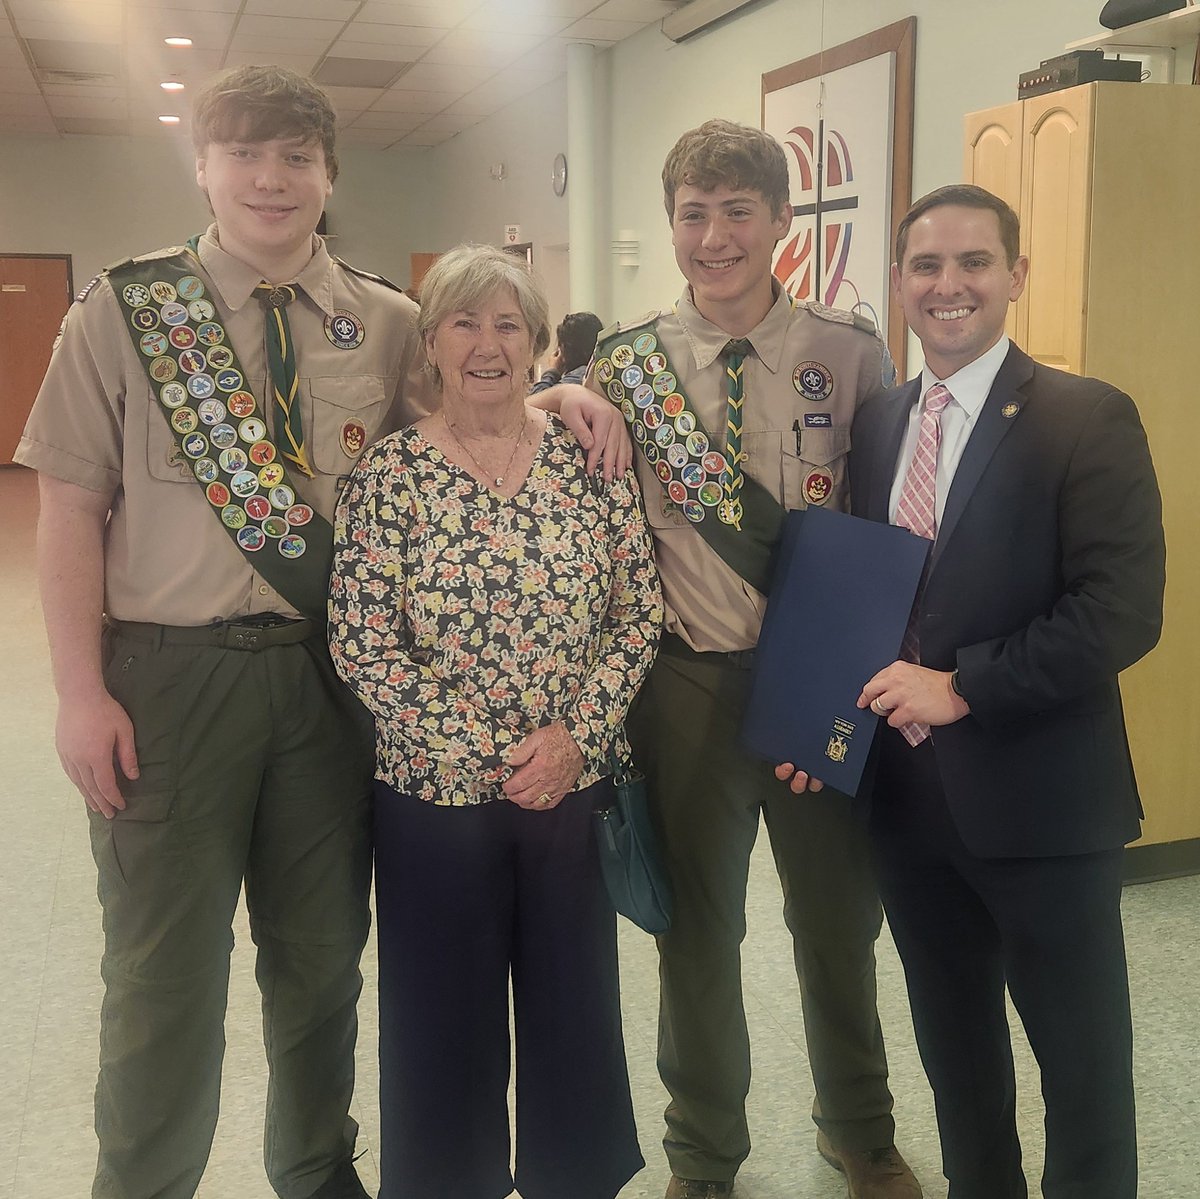 Congrats to Jacob and Joshua Erenberg of Yorktown Troop 174 on making Eagle Scout! Their grandmother was beaming with pride because of this tremendous accomplishment!